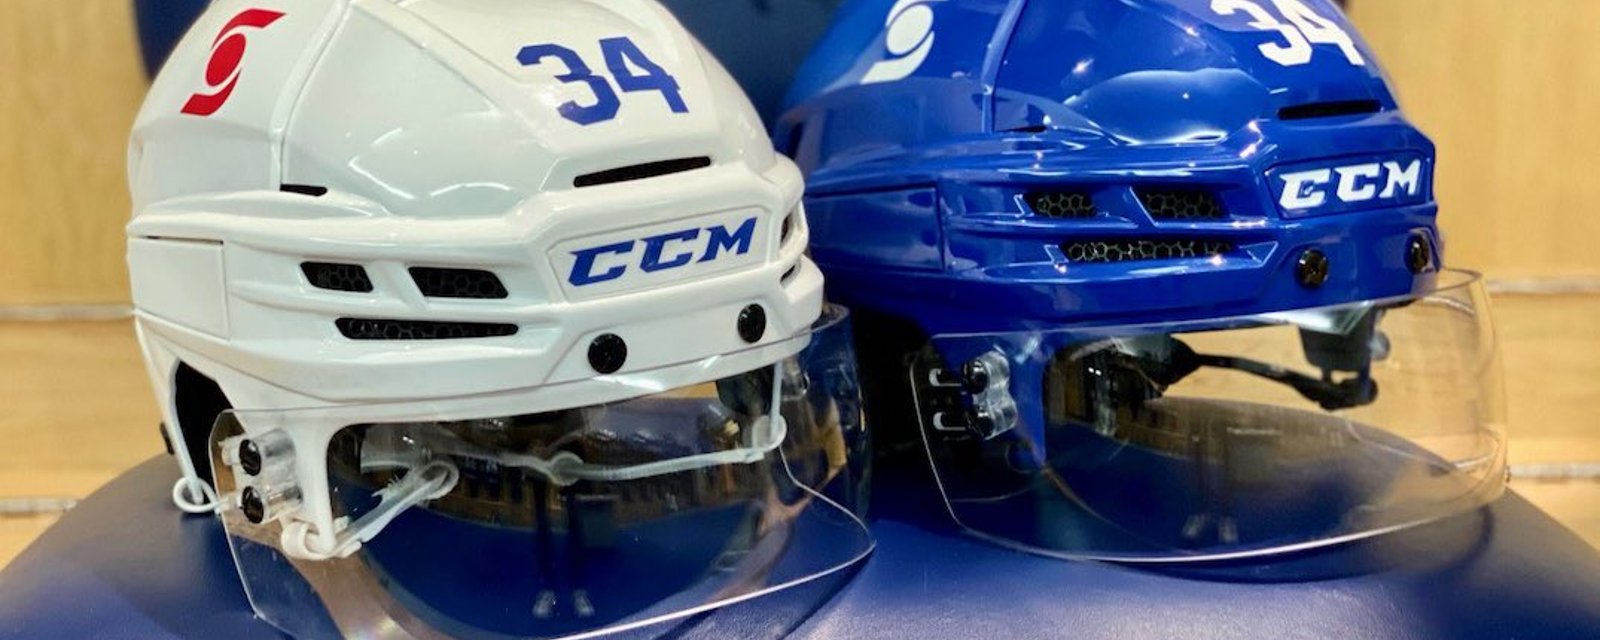 NHL recoups insane amount of money thanks to controversial helmet ads! 